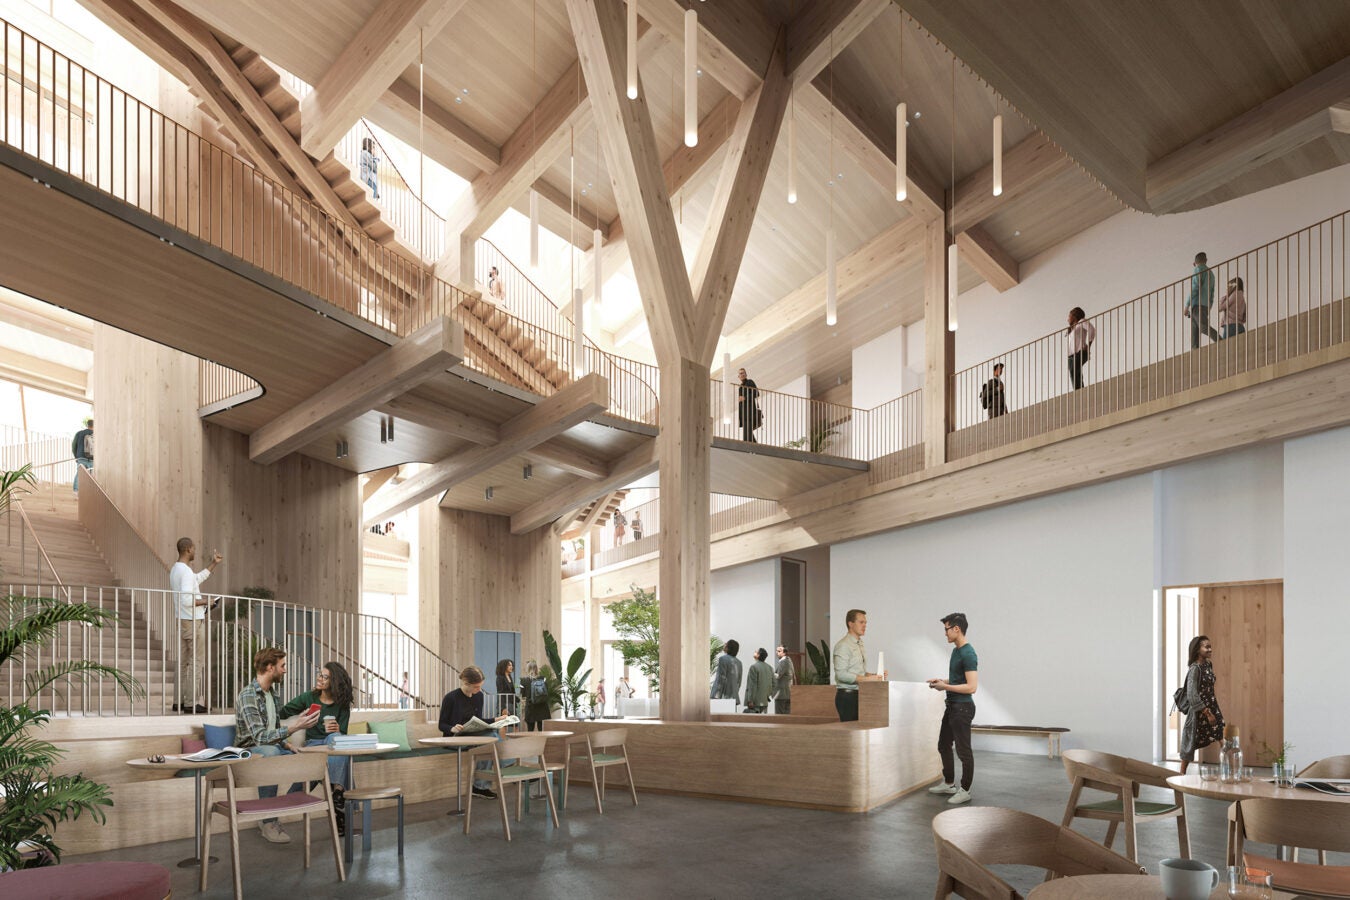 The visible mass timber columns and beams in the building’s design.